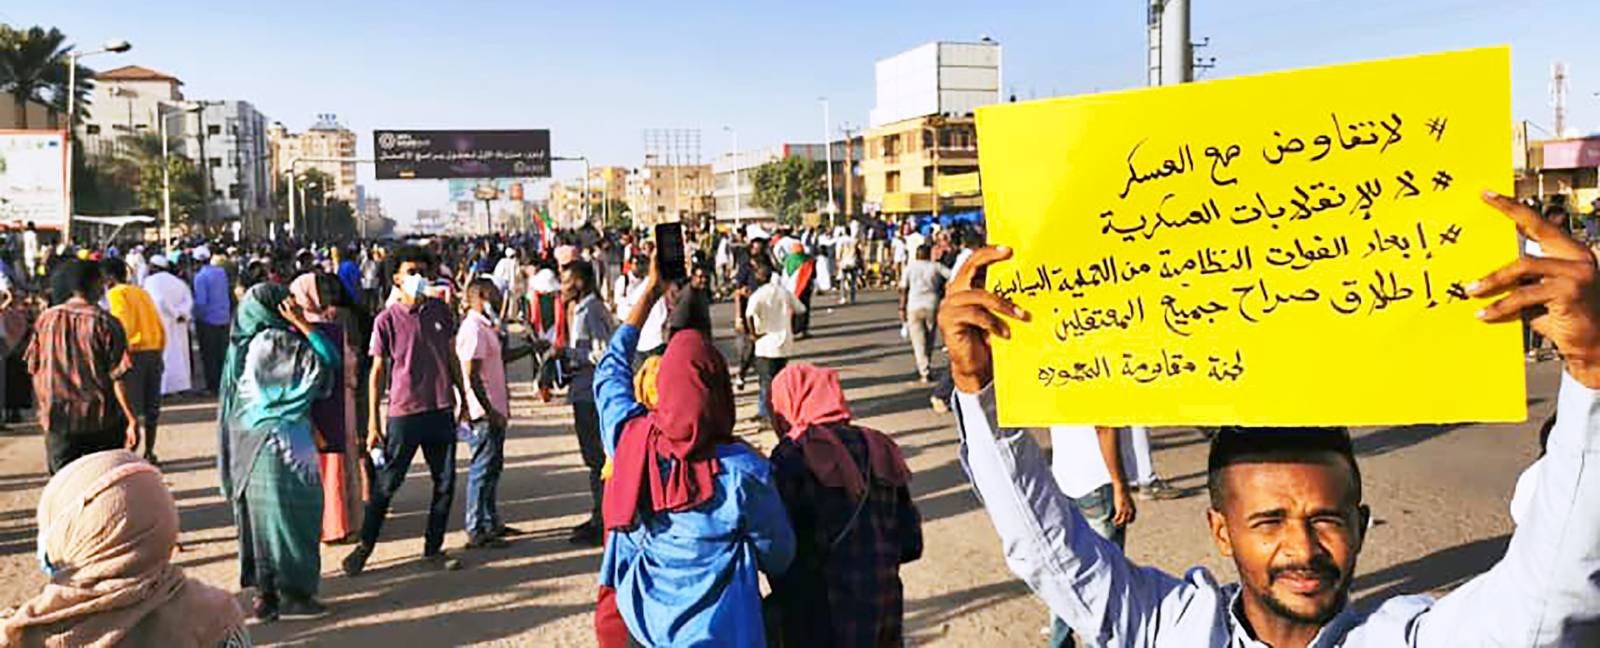 A Sudanese protester holding a sign demanding the military separate from the political process